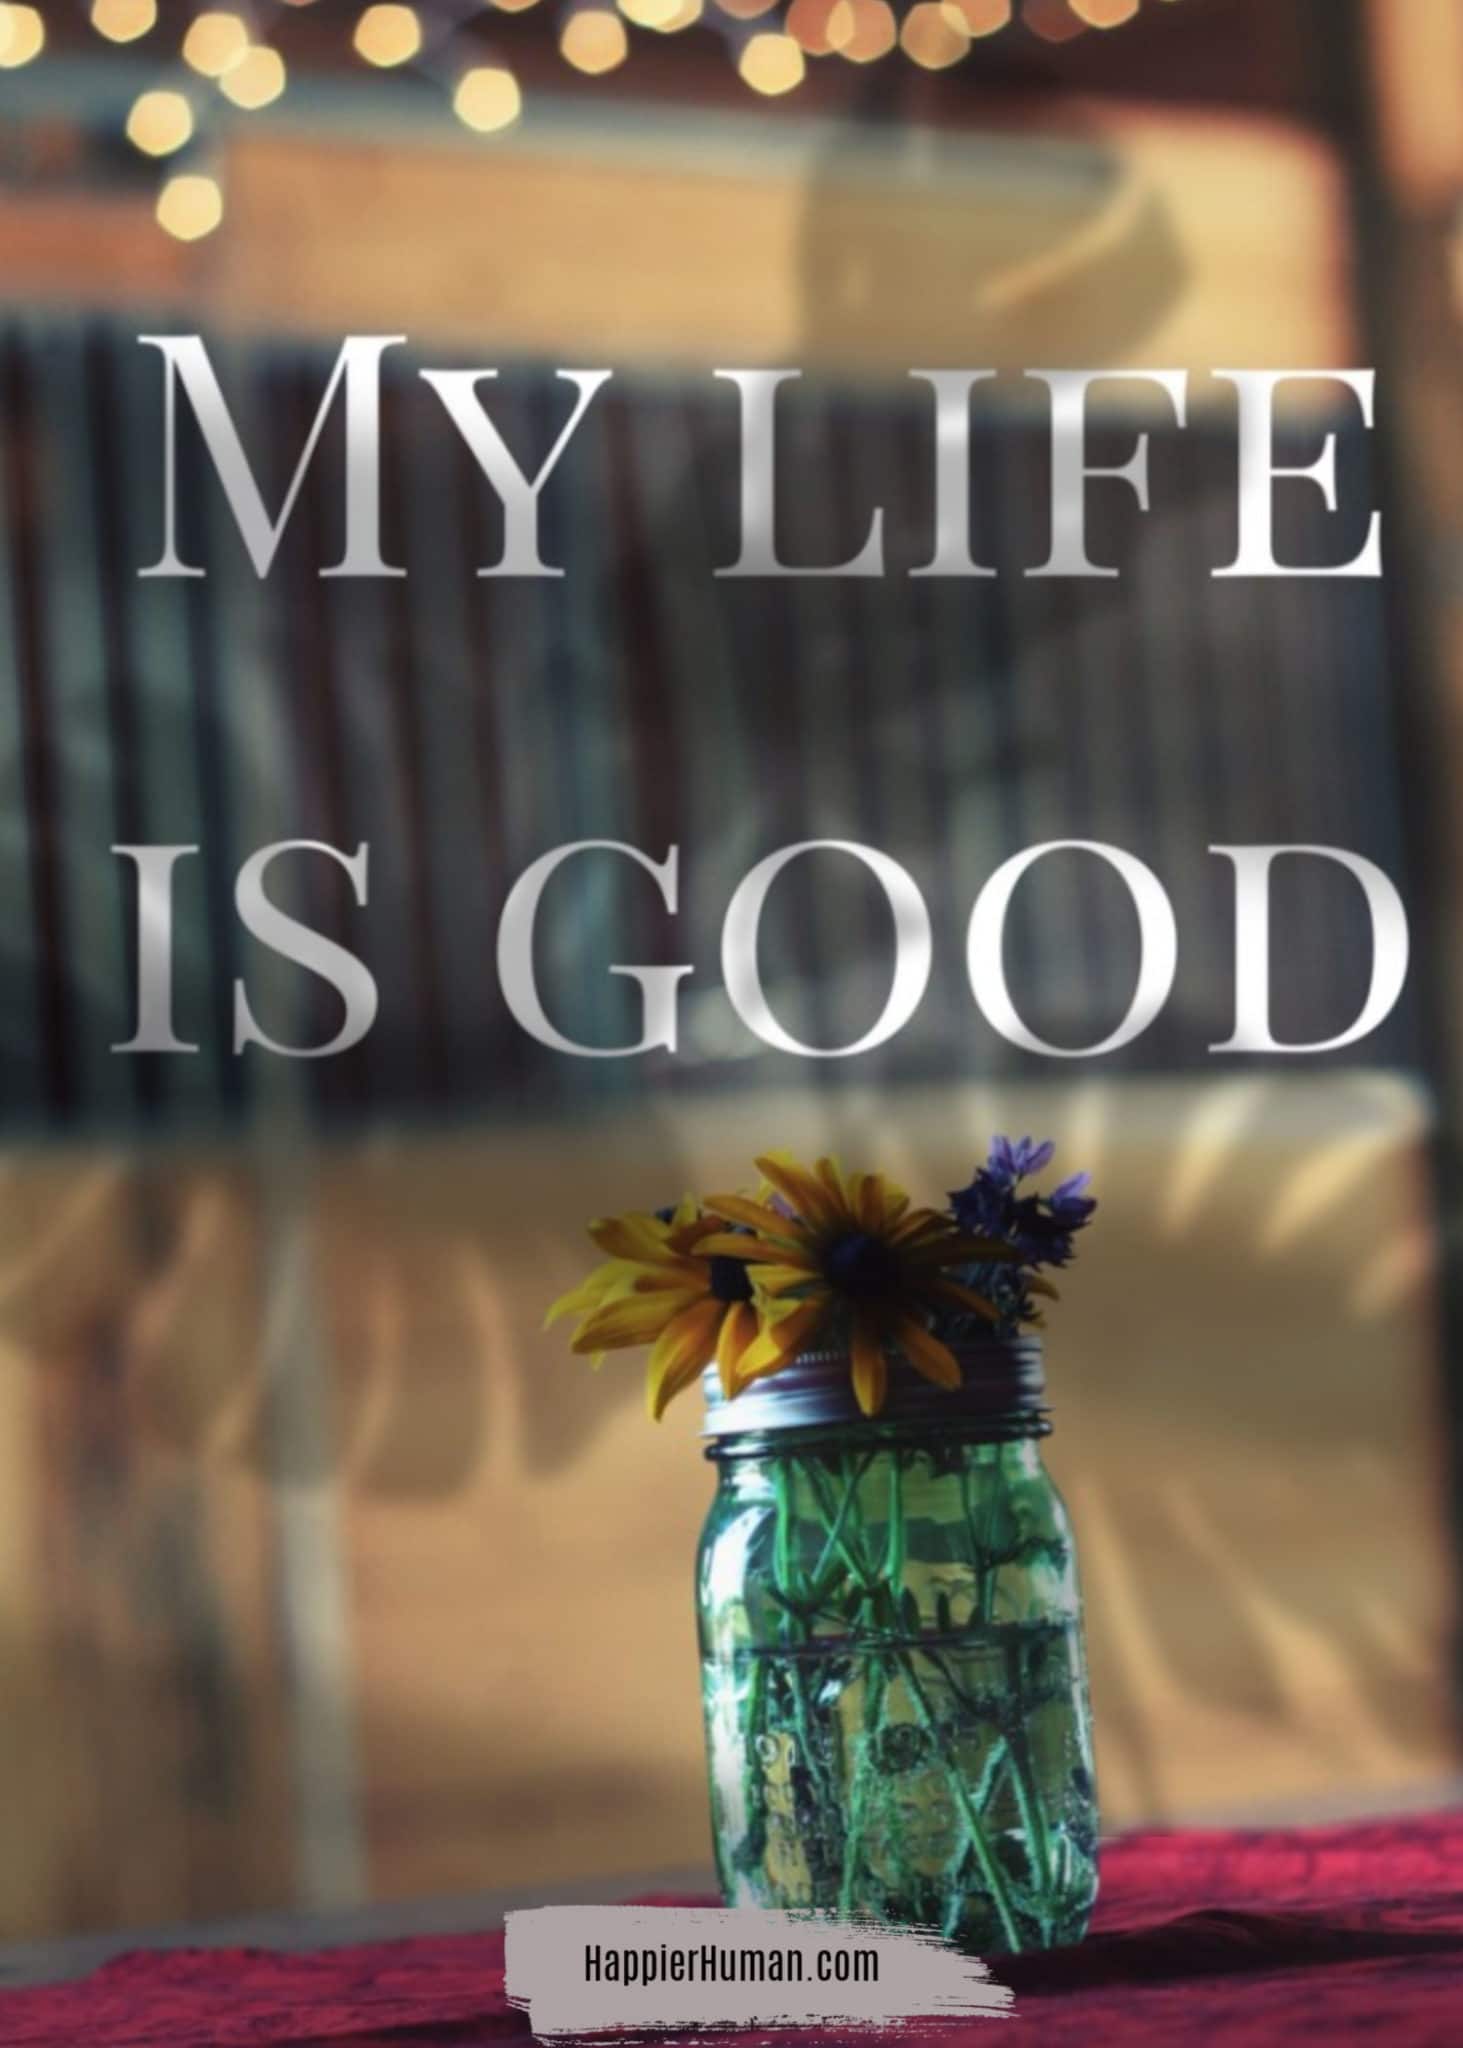 My Life is Good - daily mantra